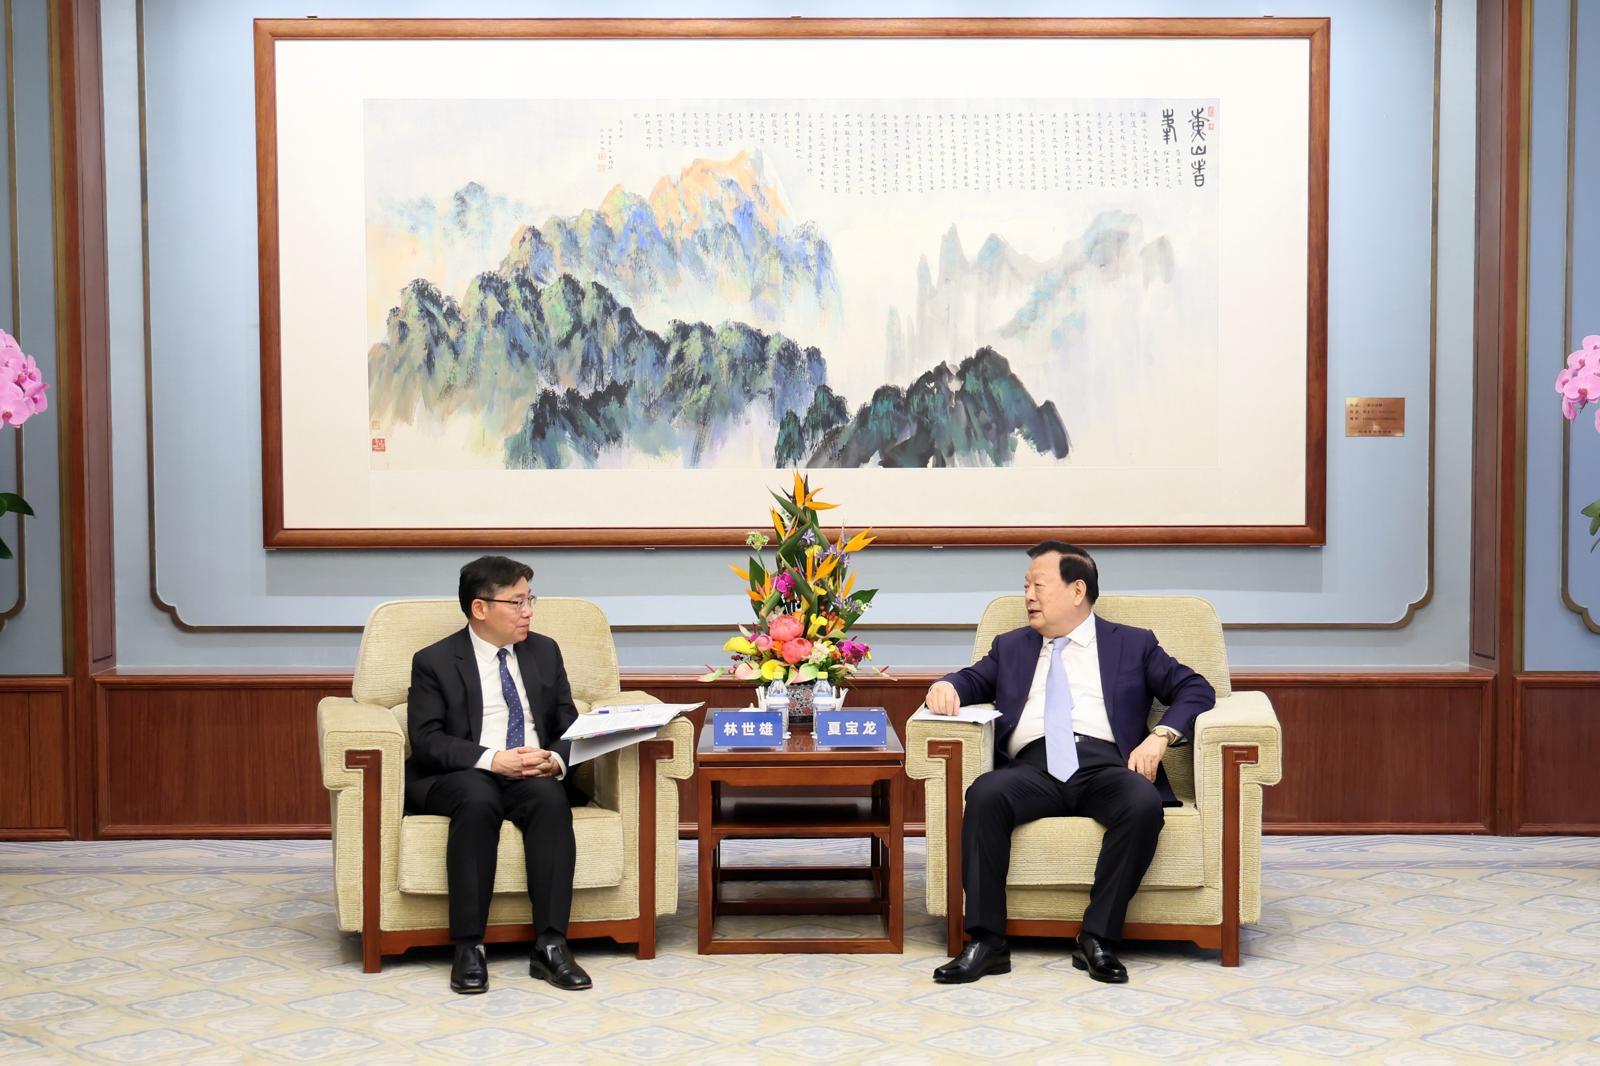 The Secretary for Transport and Logistics, Mr Lam Sai-hung (left), calls on the Director of the Hong Kong and Macao Affairs Office of the State Council, Mr Xia Baolong (right), this morning (April 10), briefing him on the latest work progress on Hong Kong's maritime, aviation and logistics developments.